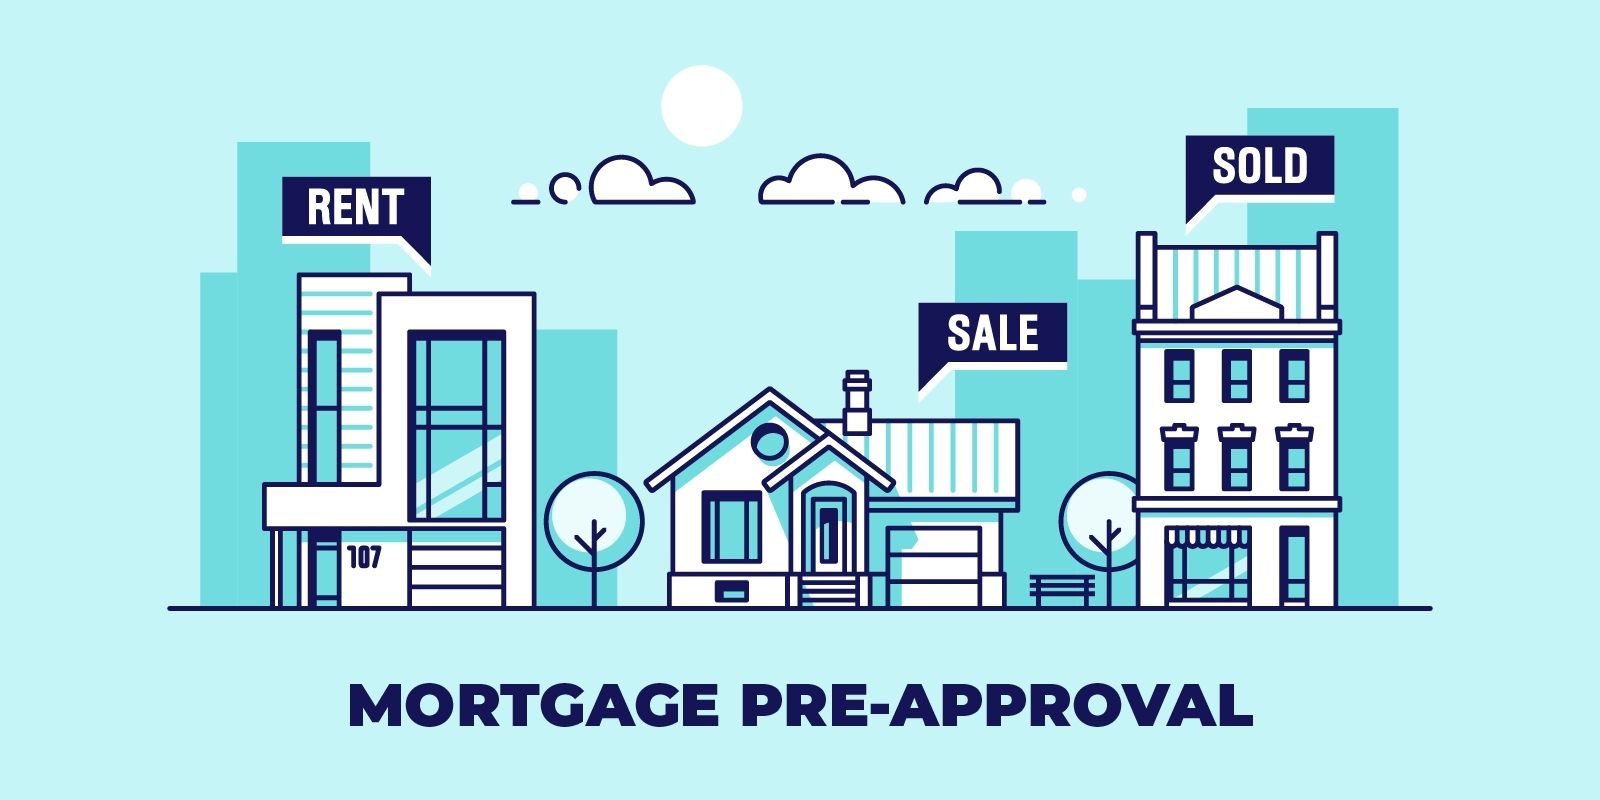 6. Get Mortgage Pre-Approval